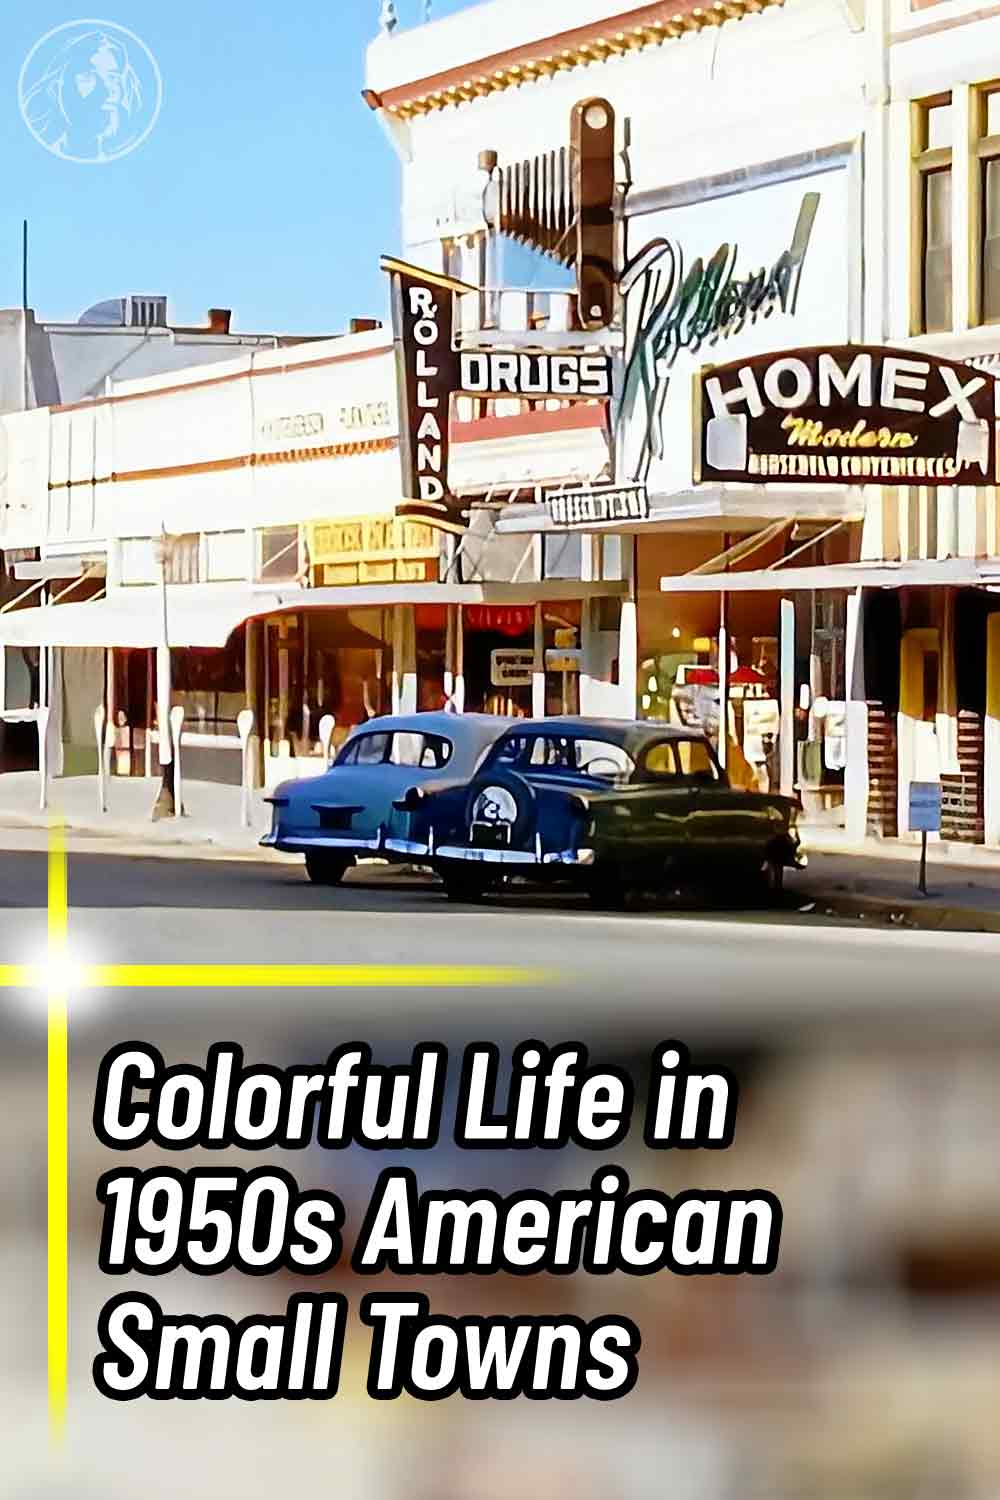 Colorful Life in 1950s American Small Towns